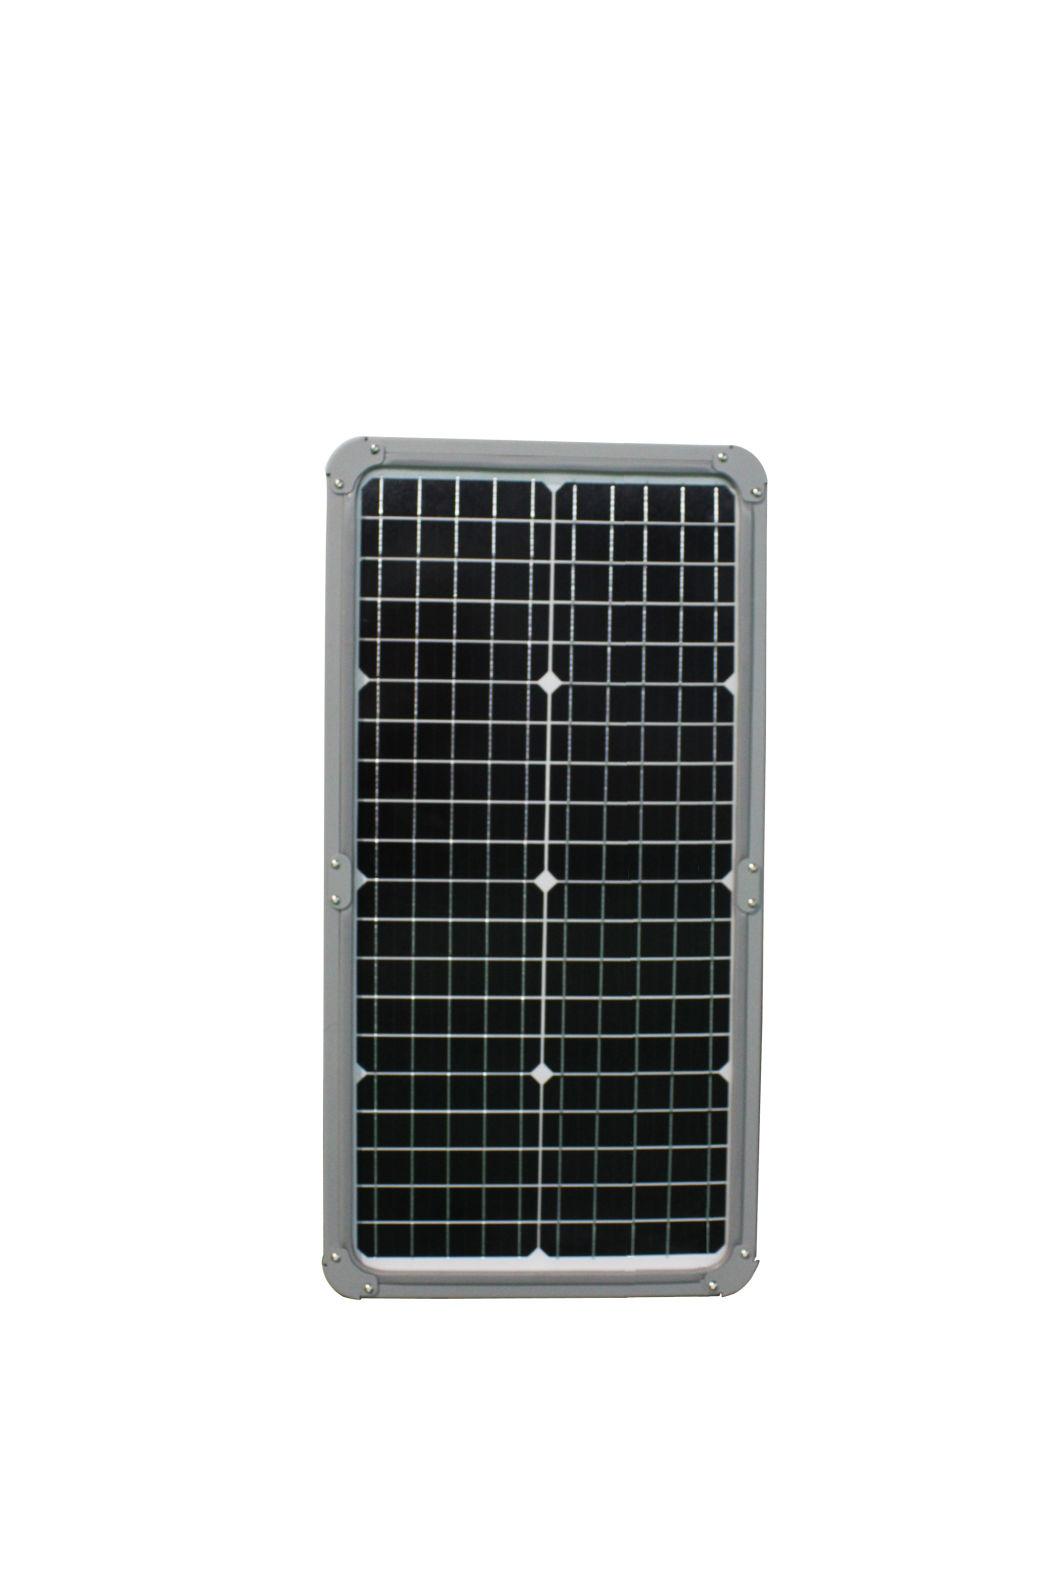 All in One Solar LED Public Luminaires 30W-80W